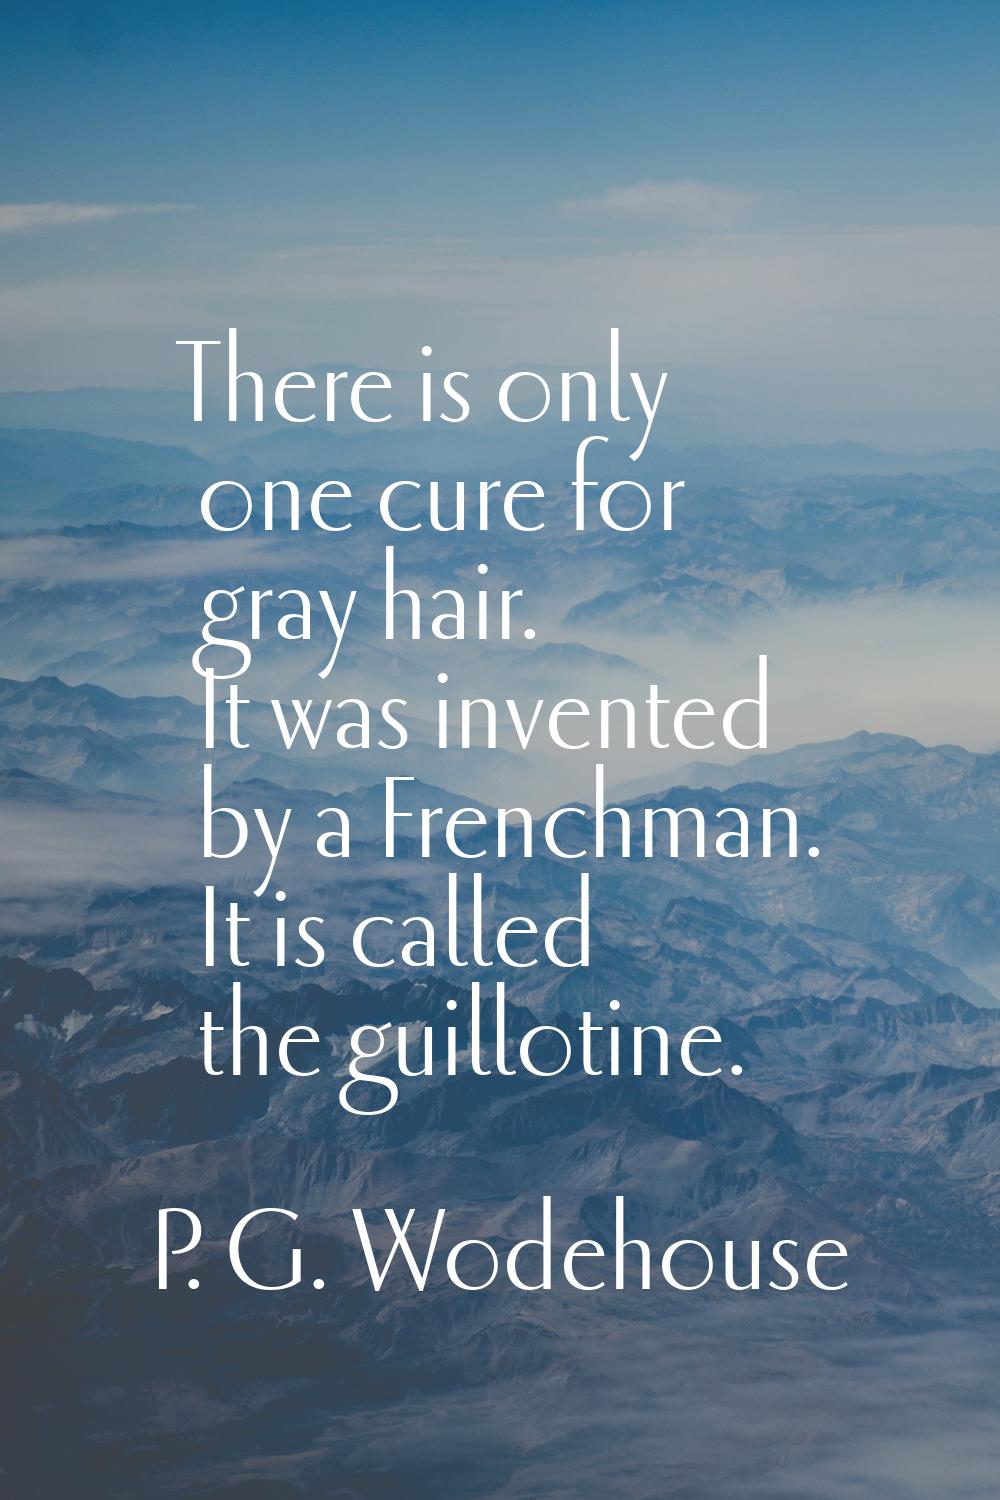 There is only one cure for gray hair. It was invented by a Frenchman. It is called the guillotine.